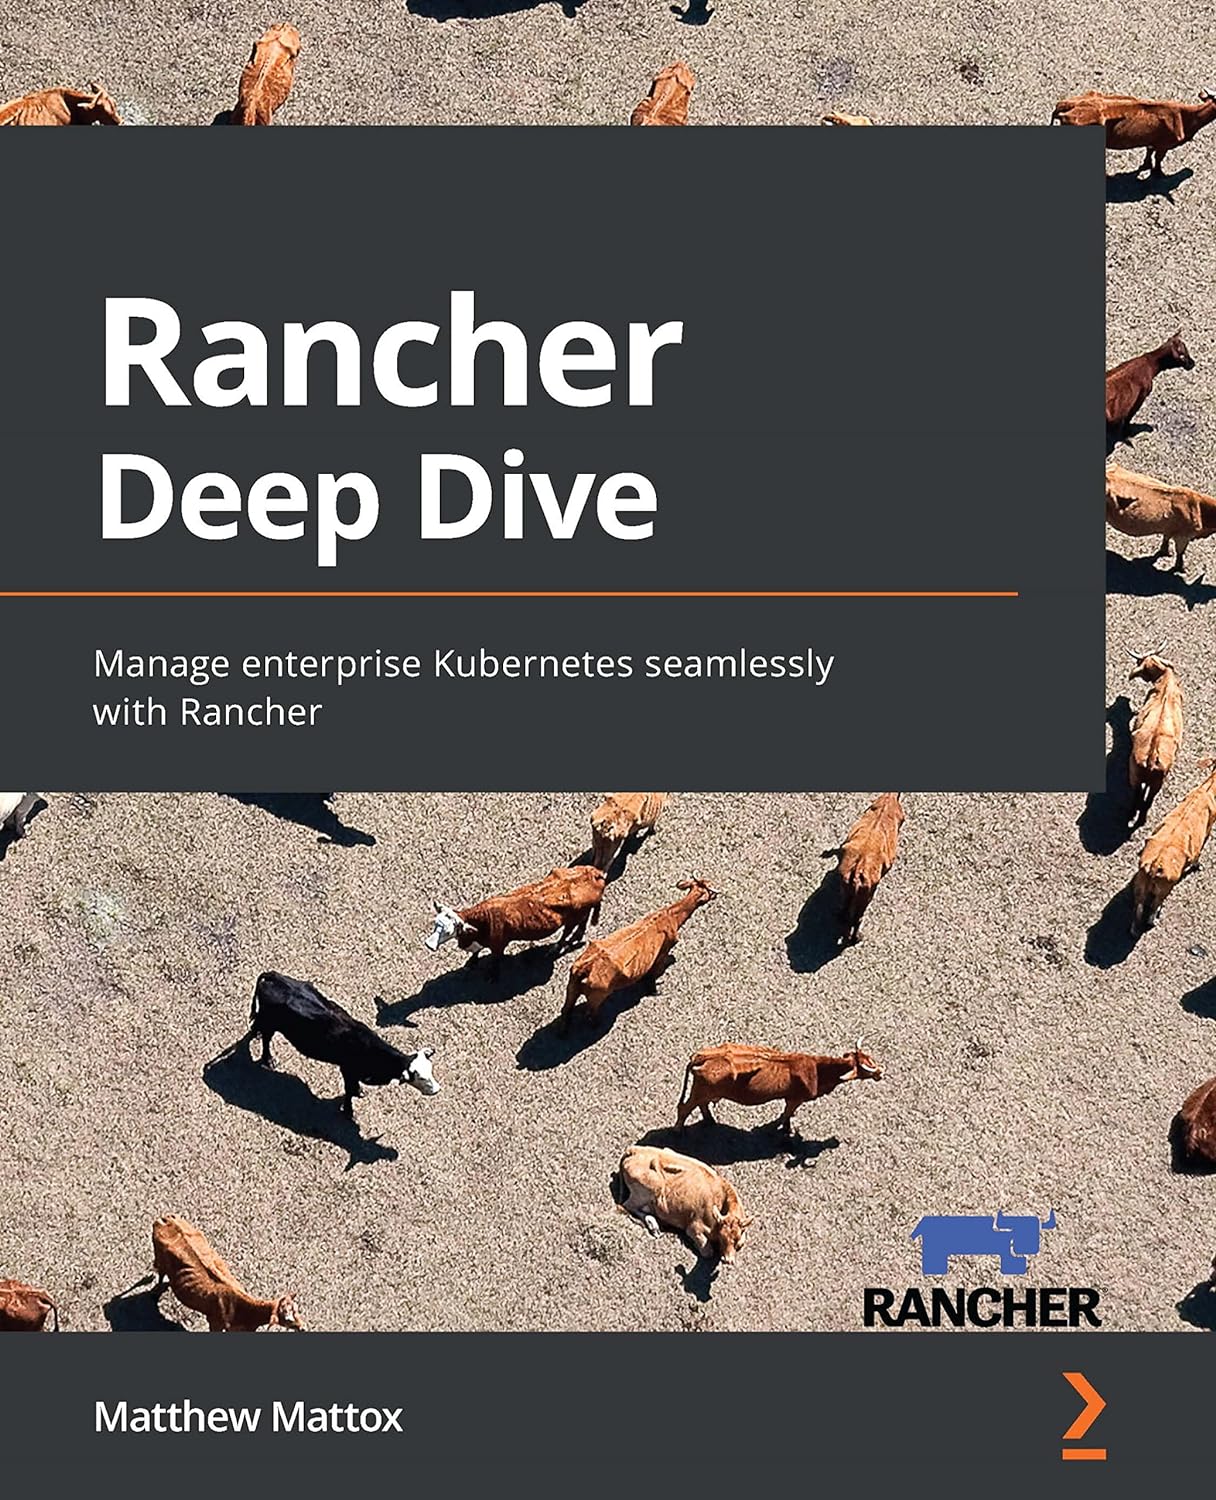 Rancher Deep Dive: Manage enterprise Kubernetes seamlessly with Rancher by Matthew Mattox